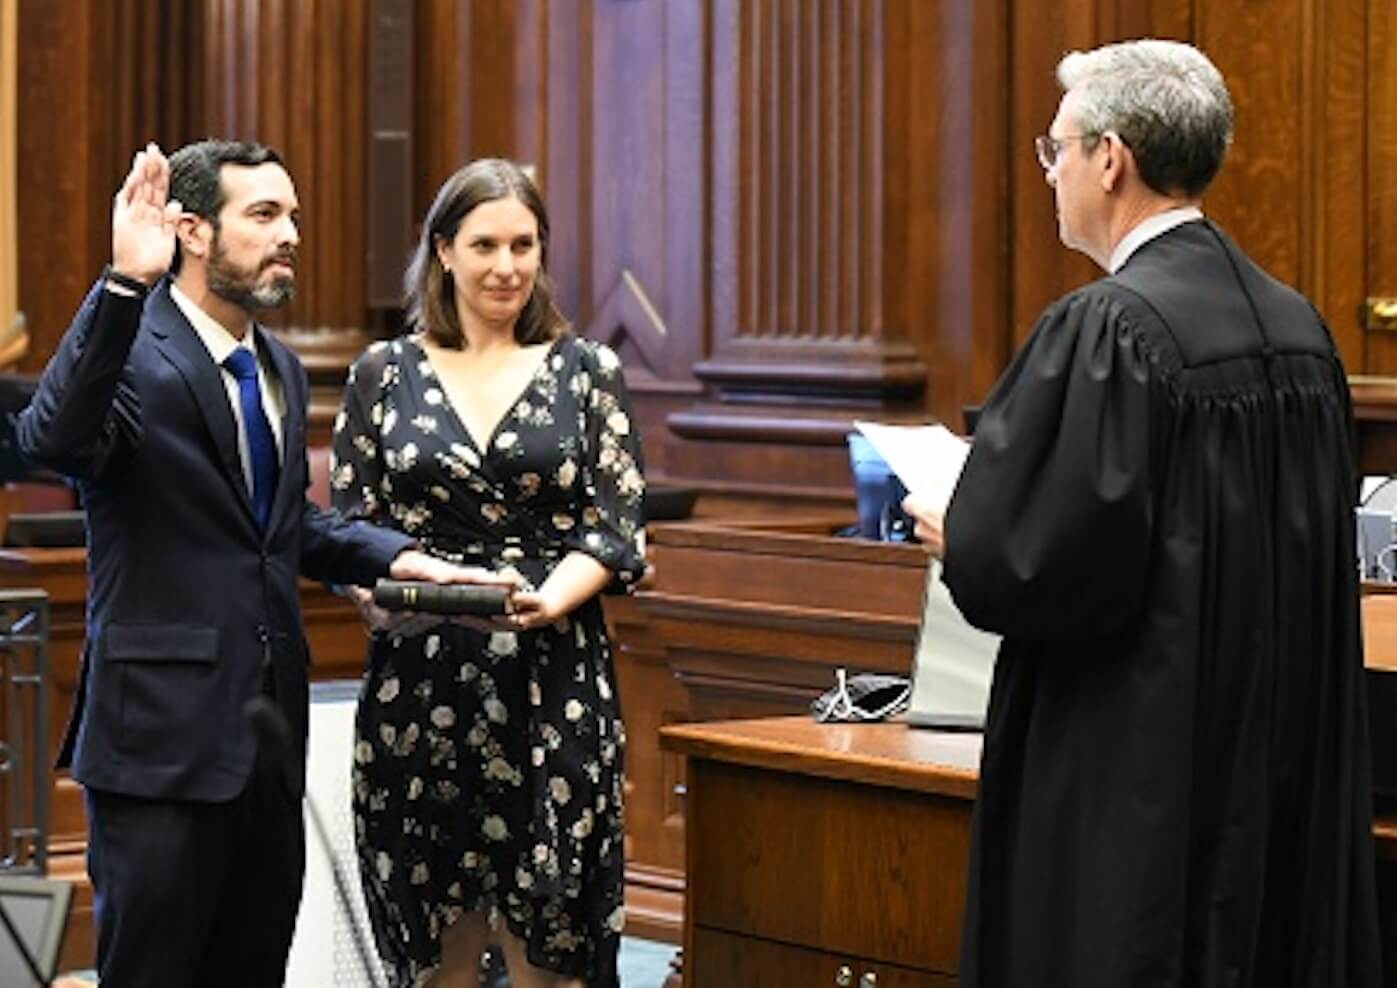 [CREDIT: RI U.S. Attorney] Zachary A. Cunha took the oath of office Monday as the United States Attorney for the District of Rhode Island.